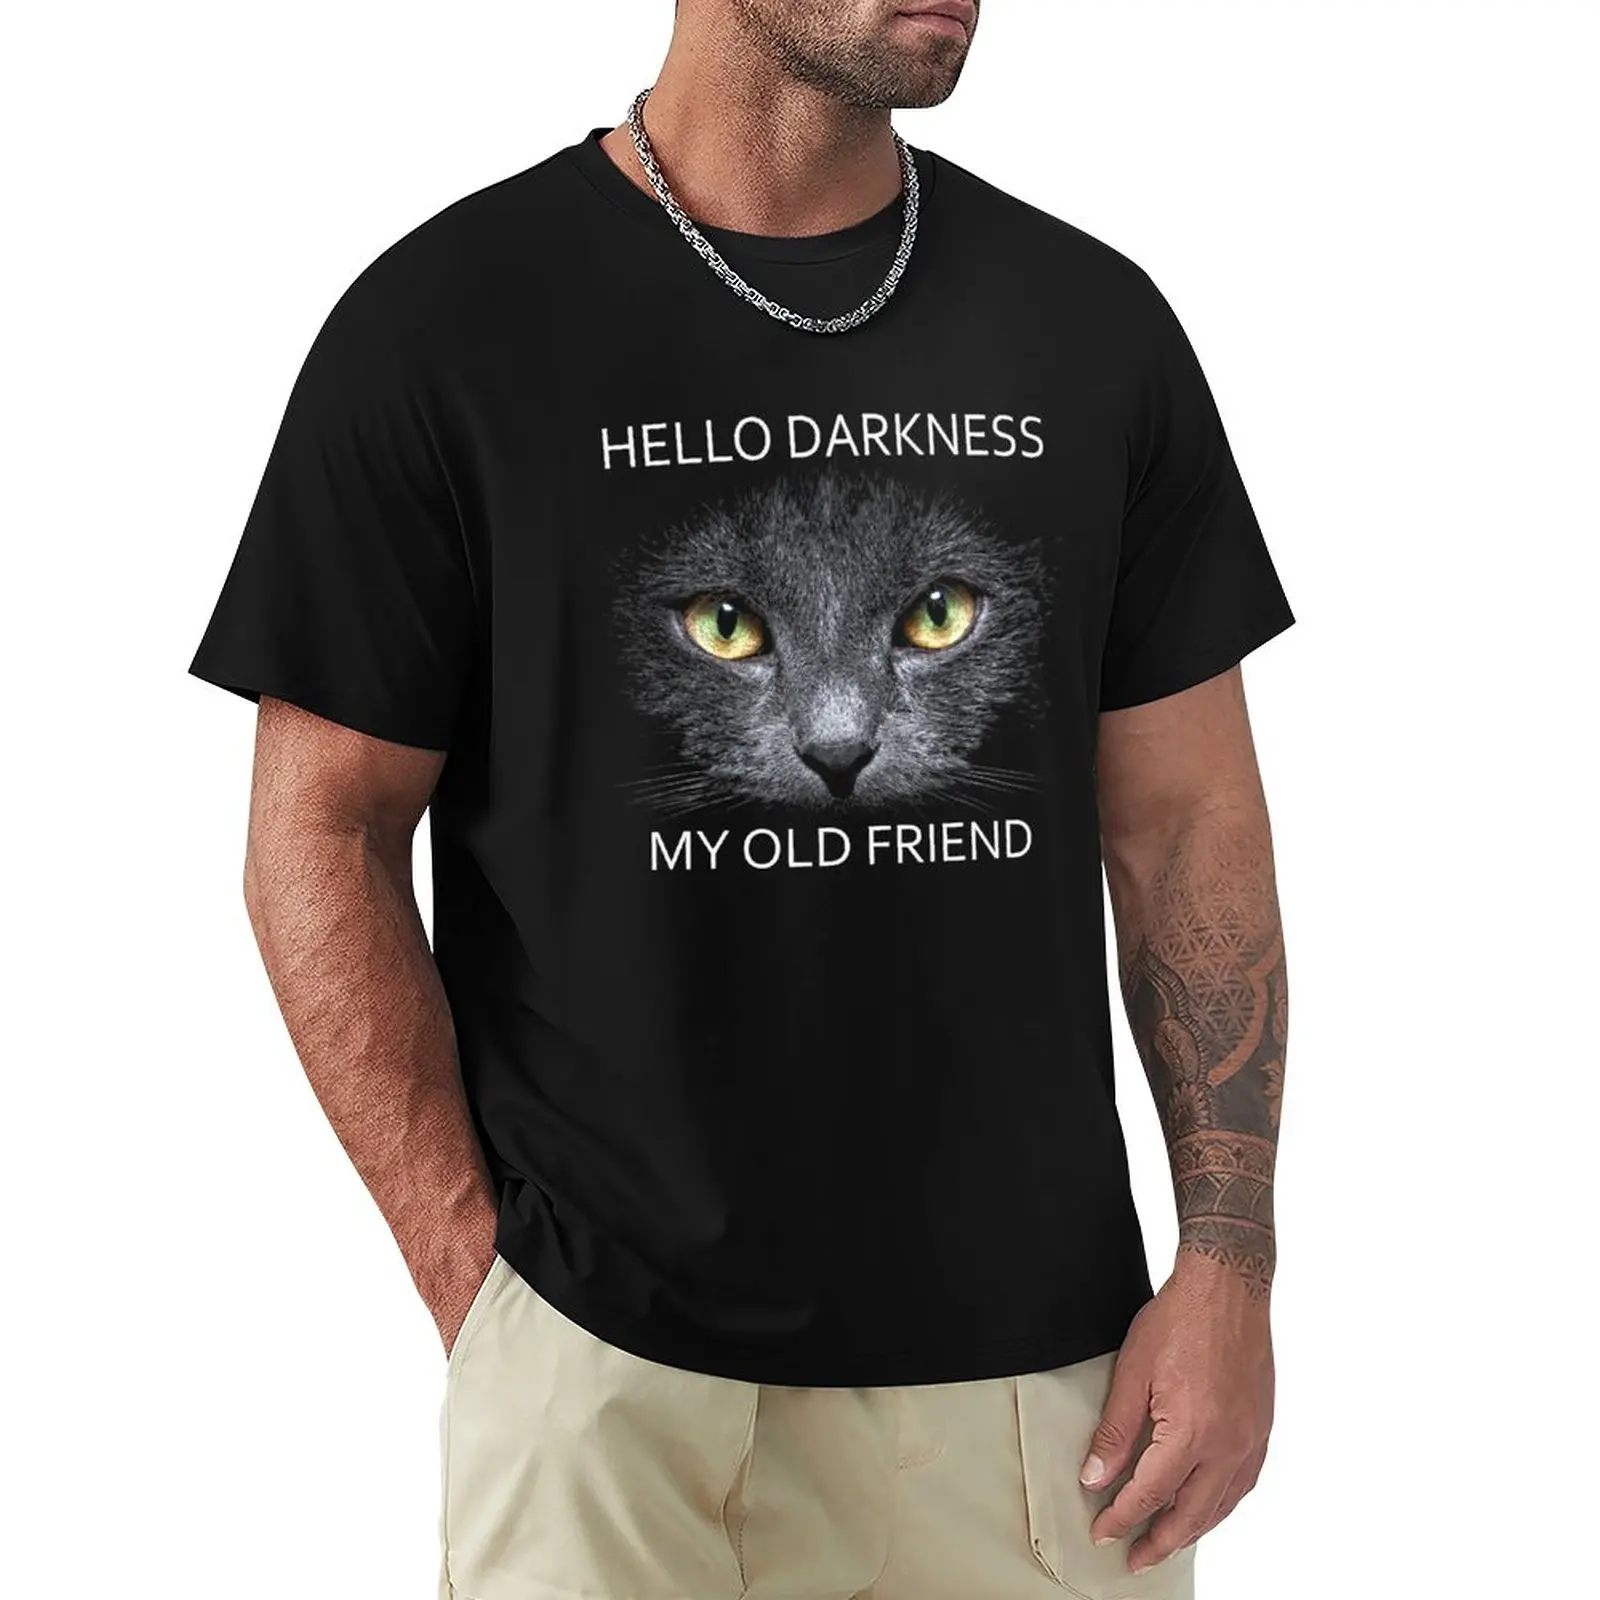 

Hello Darkness My Old Friend T-Shirt quick drying t-shirt vintage t shirt black t-shirts for men